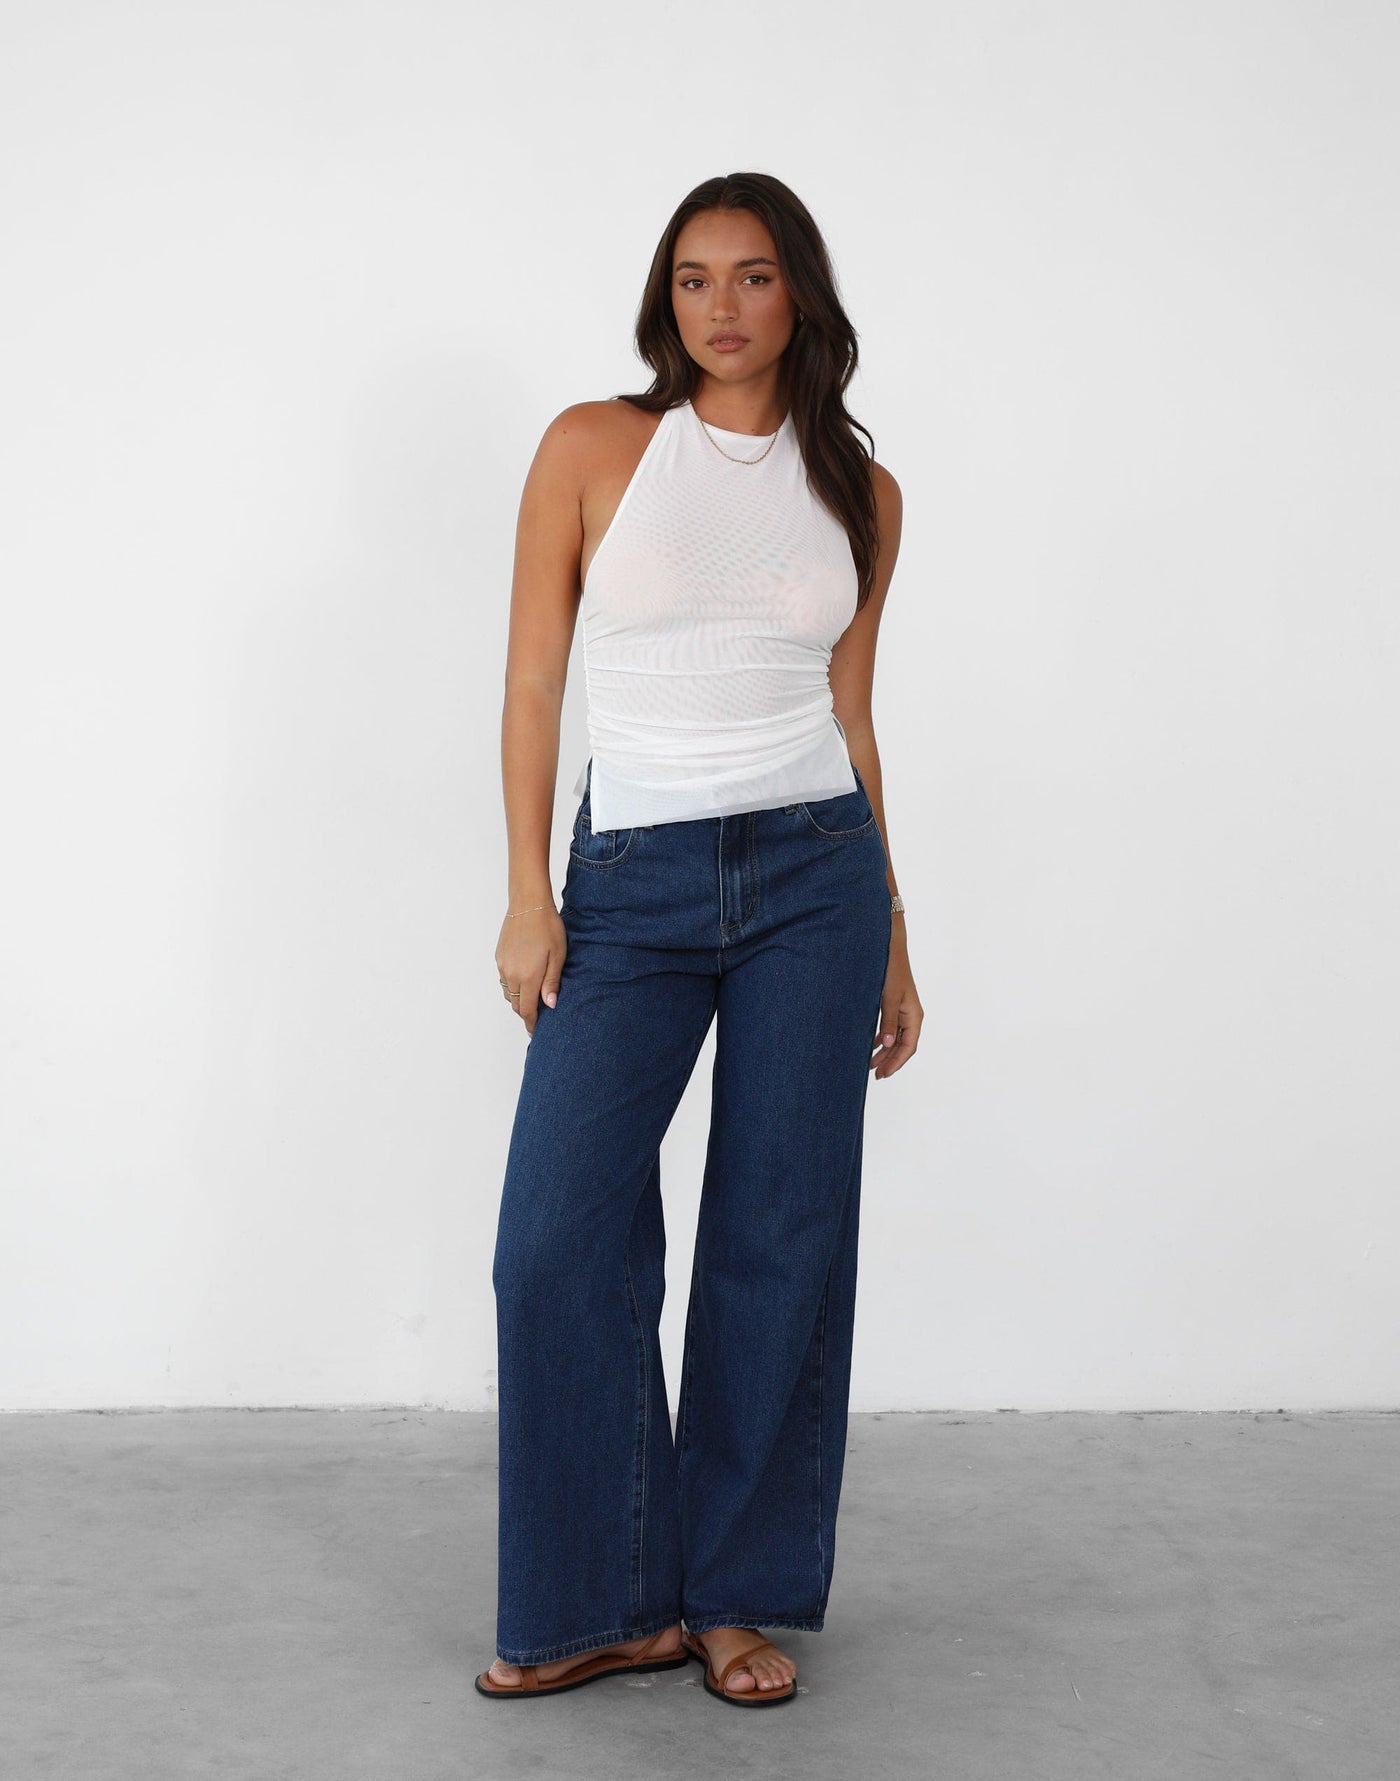 Tinah Jeans (Indigo) | High Waisted Straight Leg Jeans - Women's Pants - Charcoal Clothing